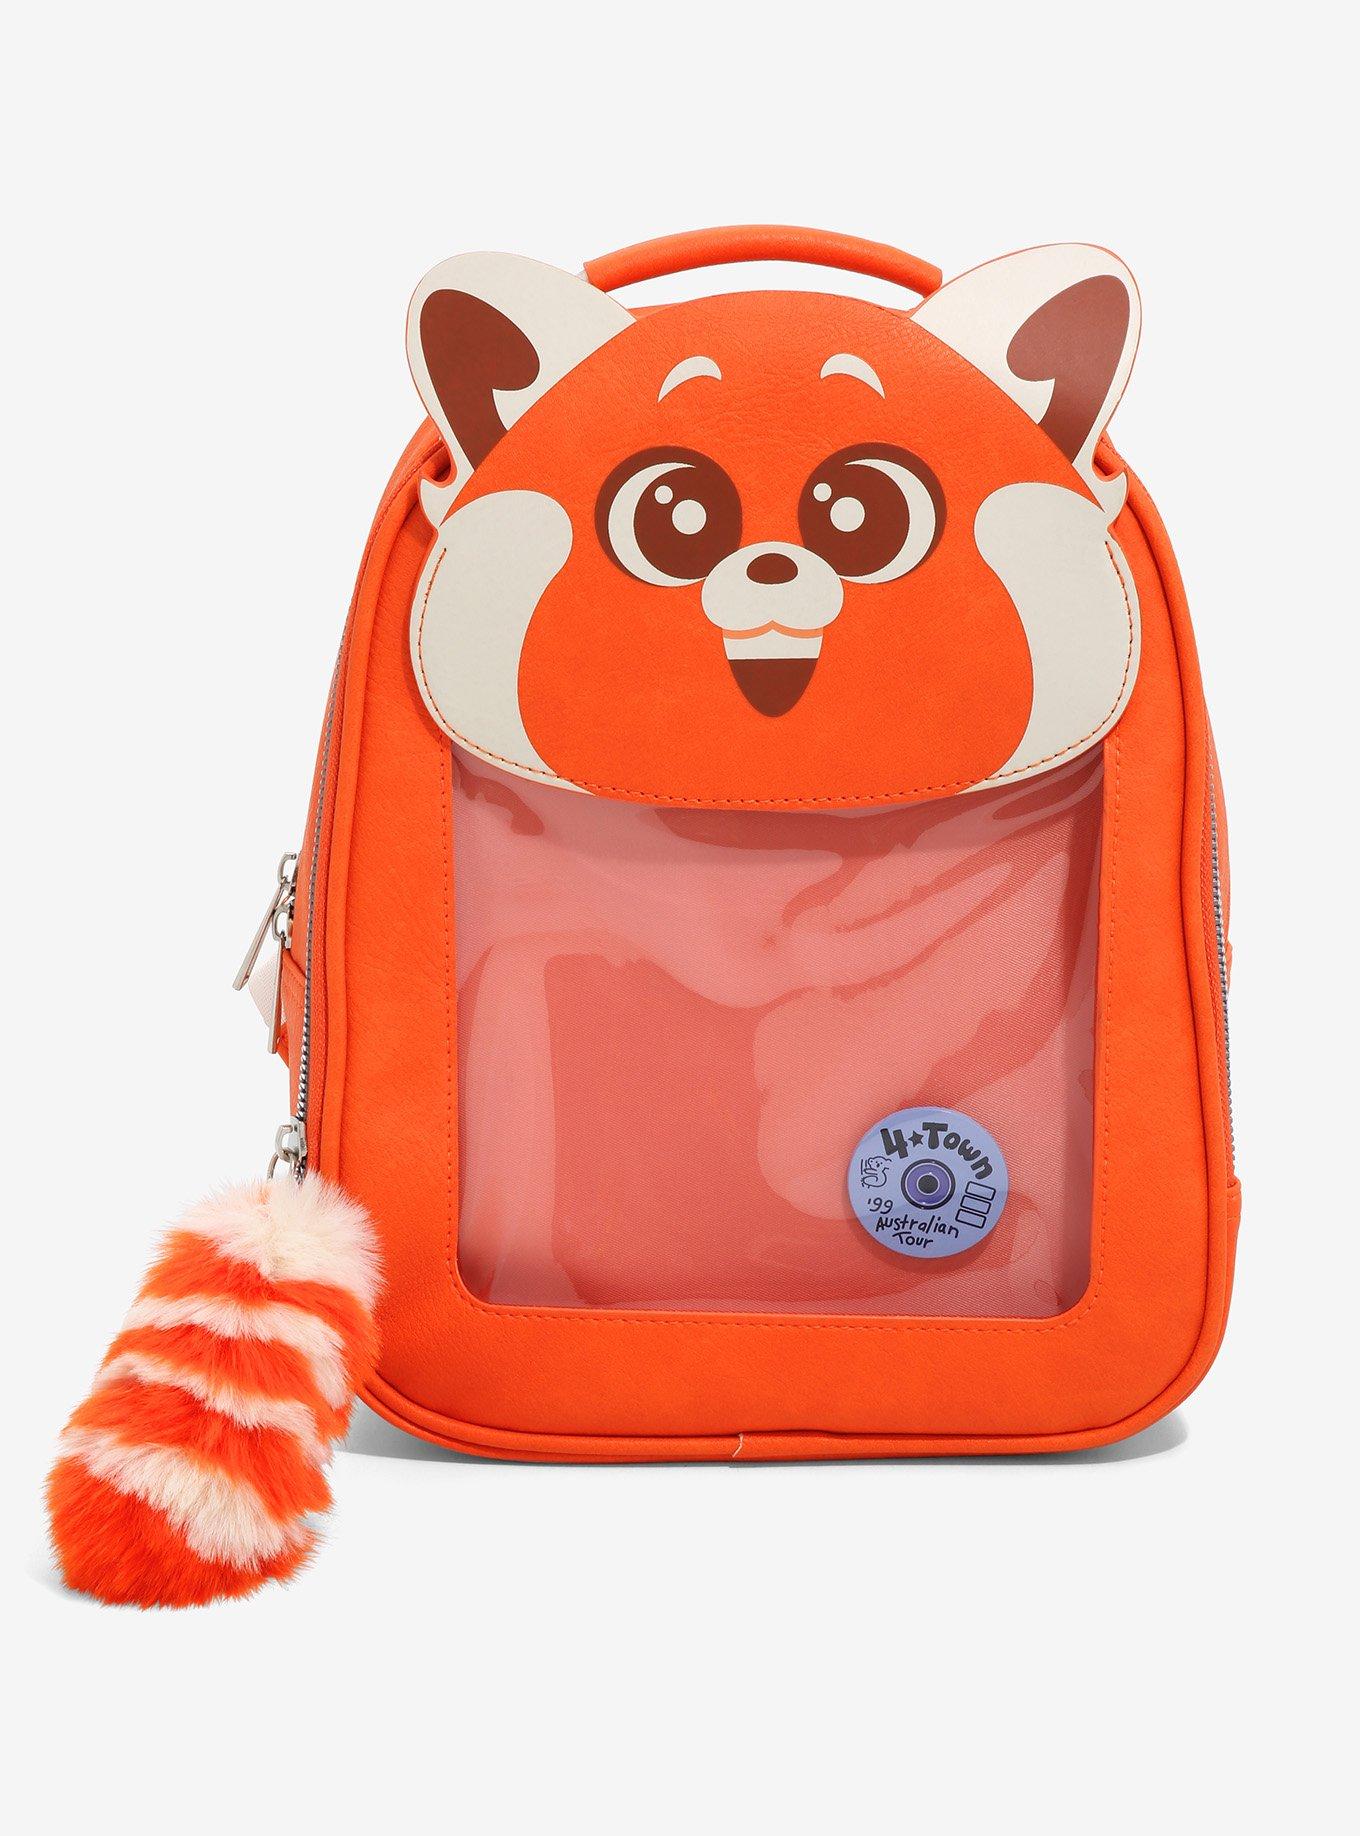 Disney Pixar Turning Red Mei Lee Panda Pin Collector Mini Backpack -  BoxLunch Exclusive